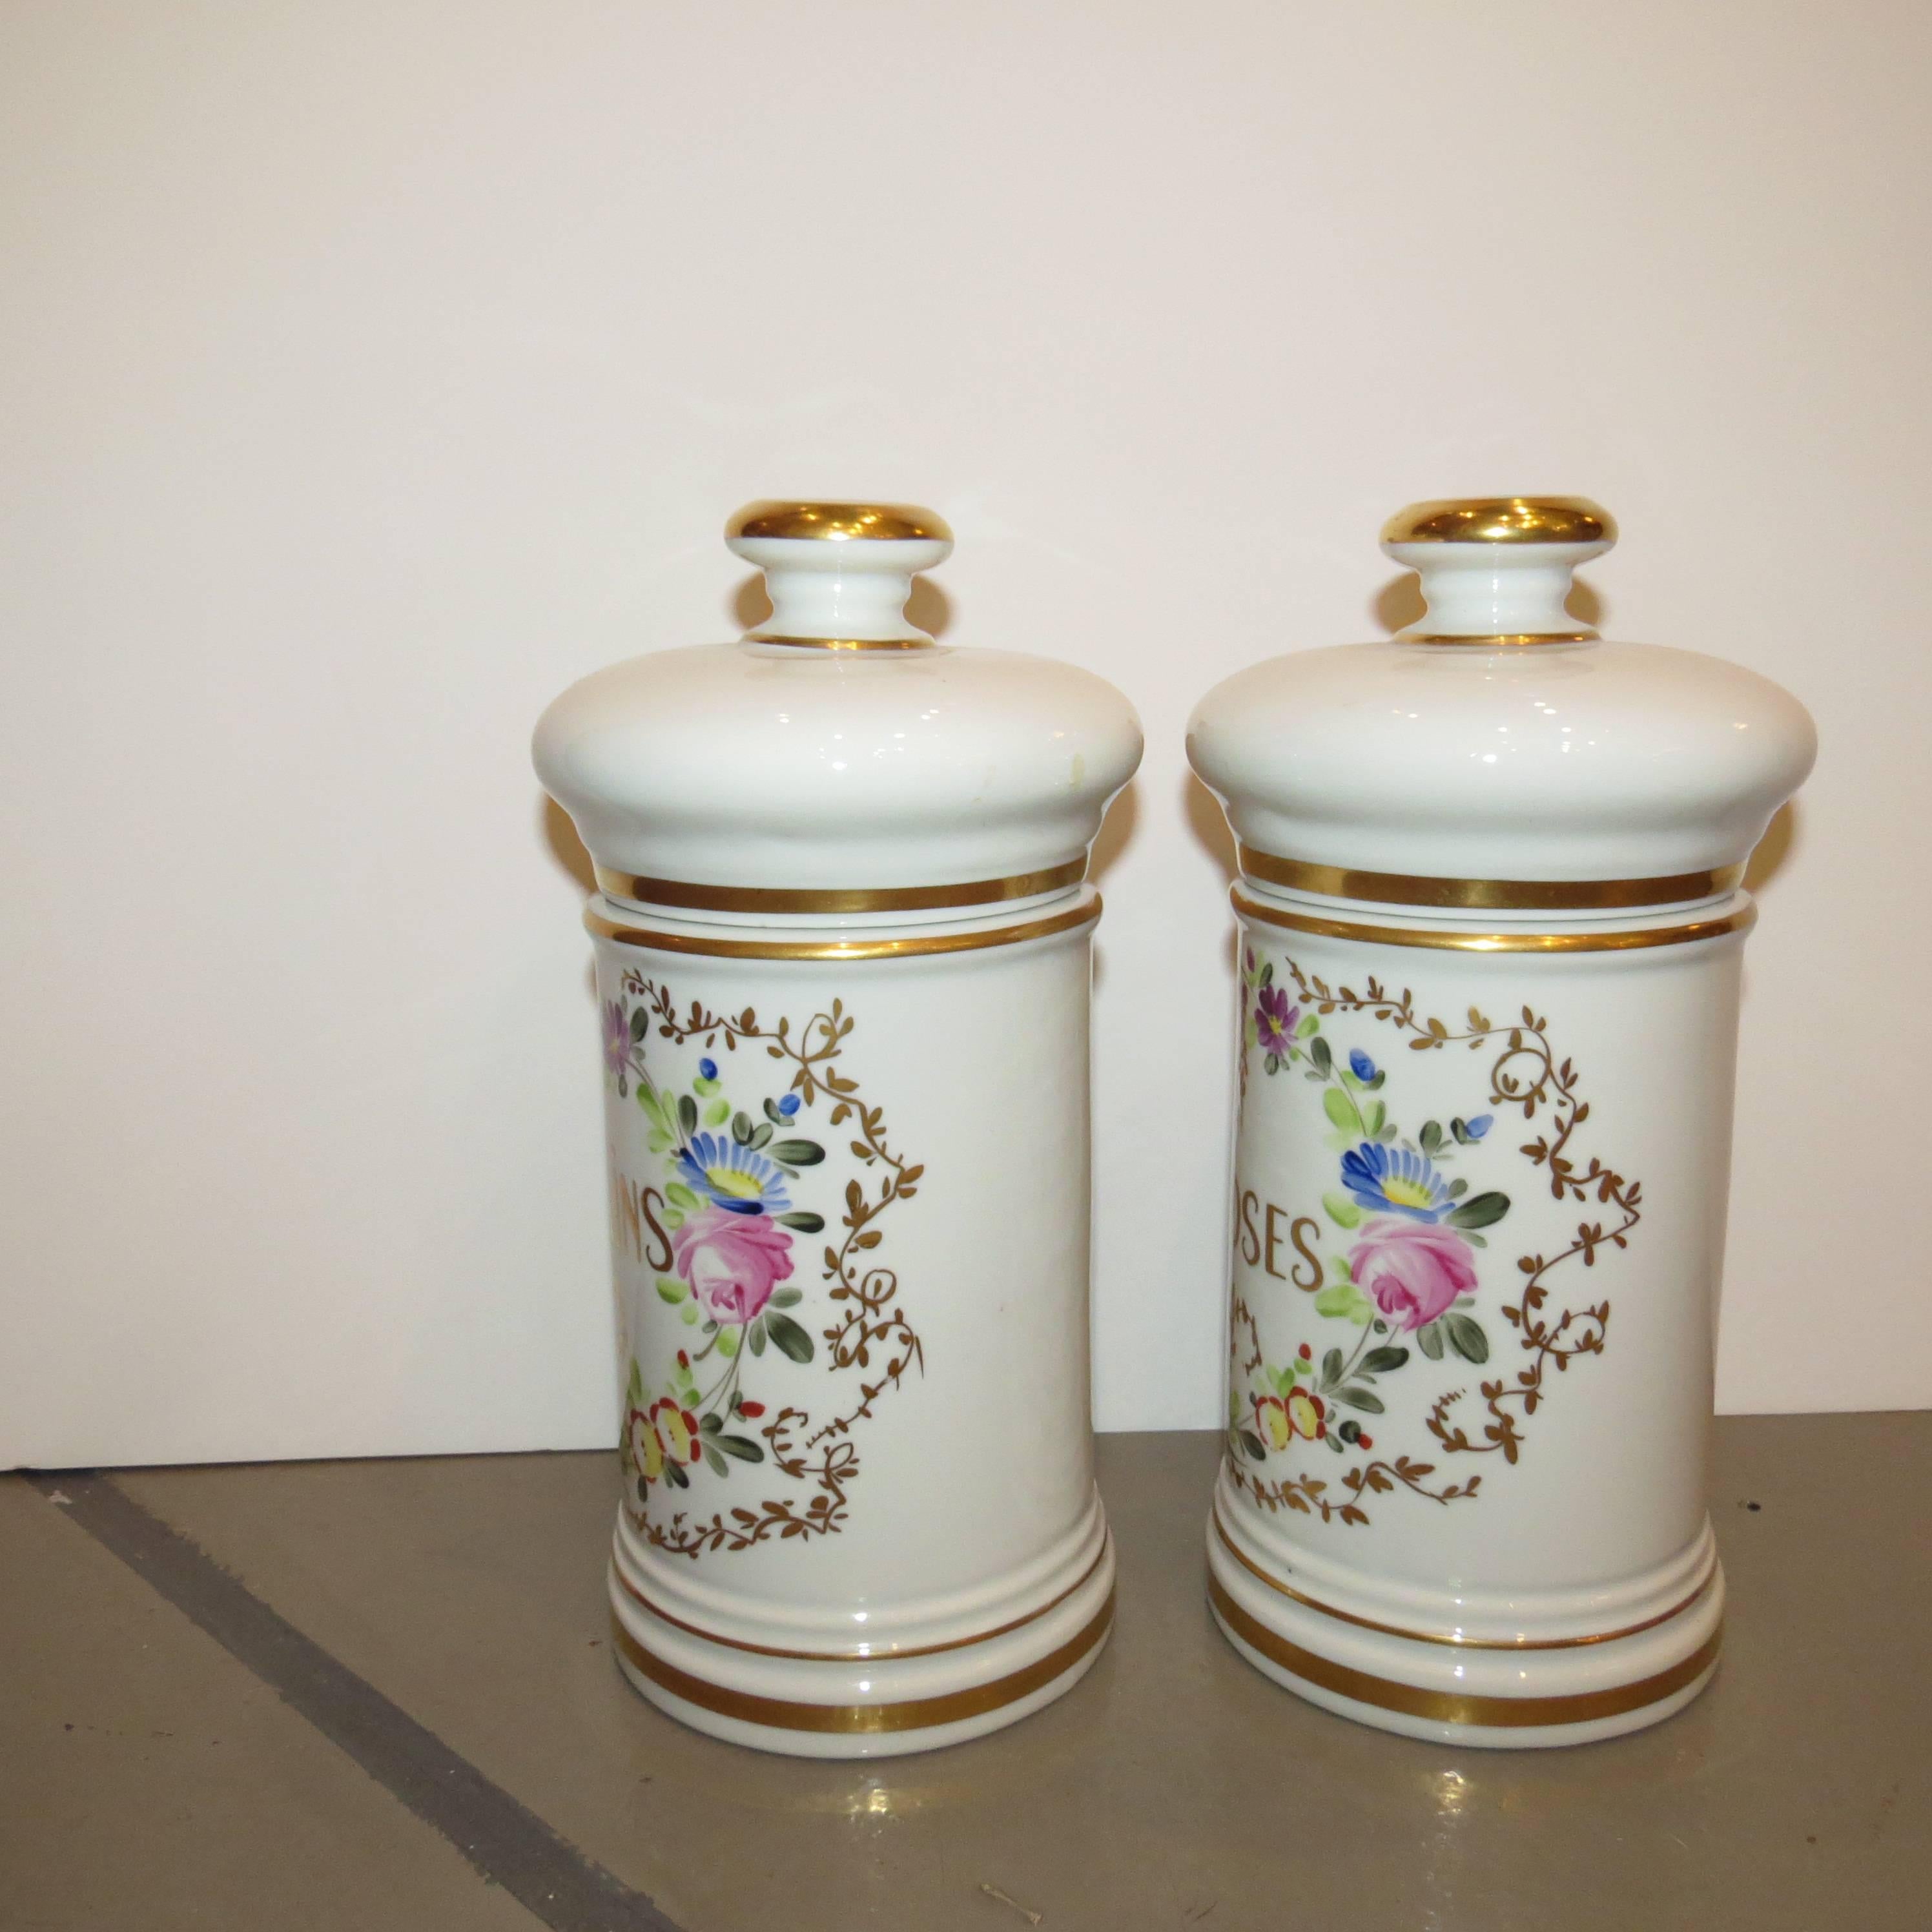 Pair of 20th century, white French porcelain lidded jars. Hand-painted with 